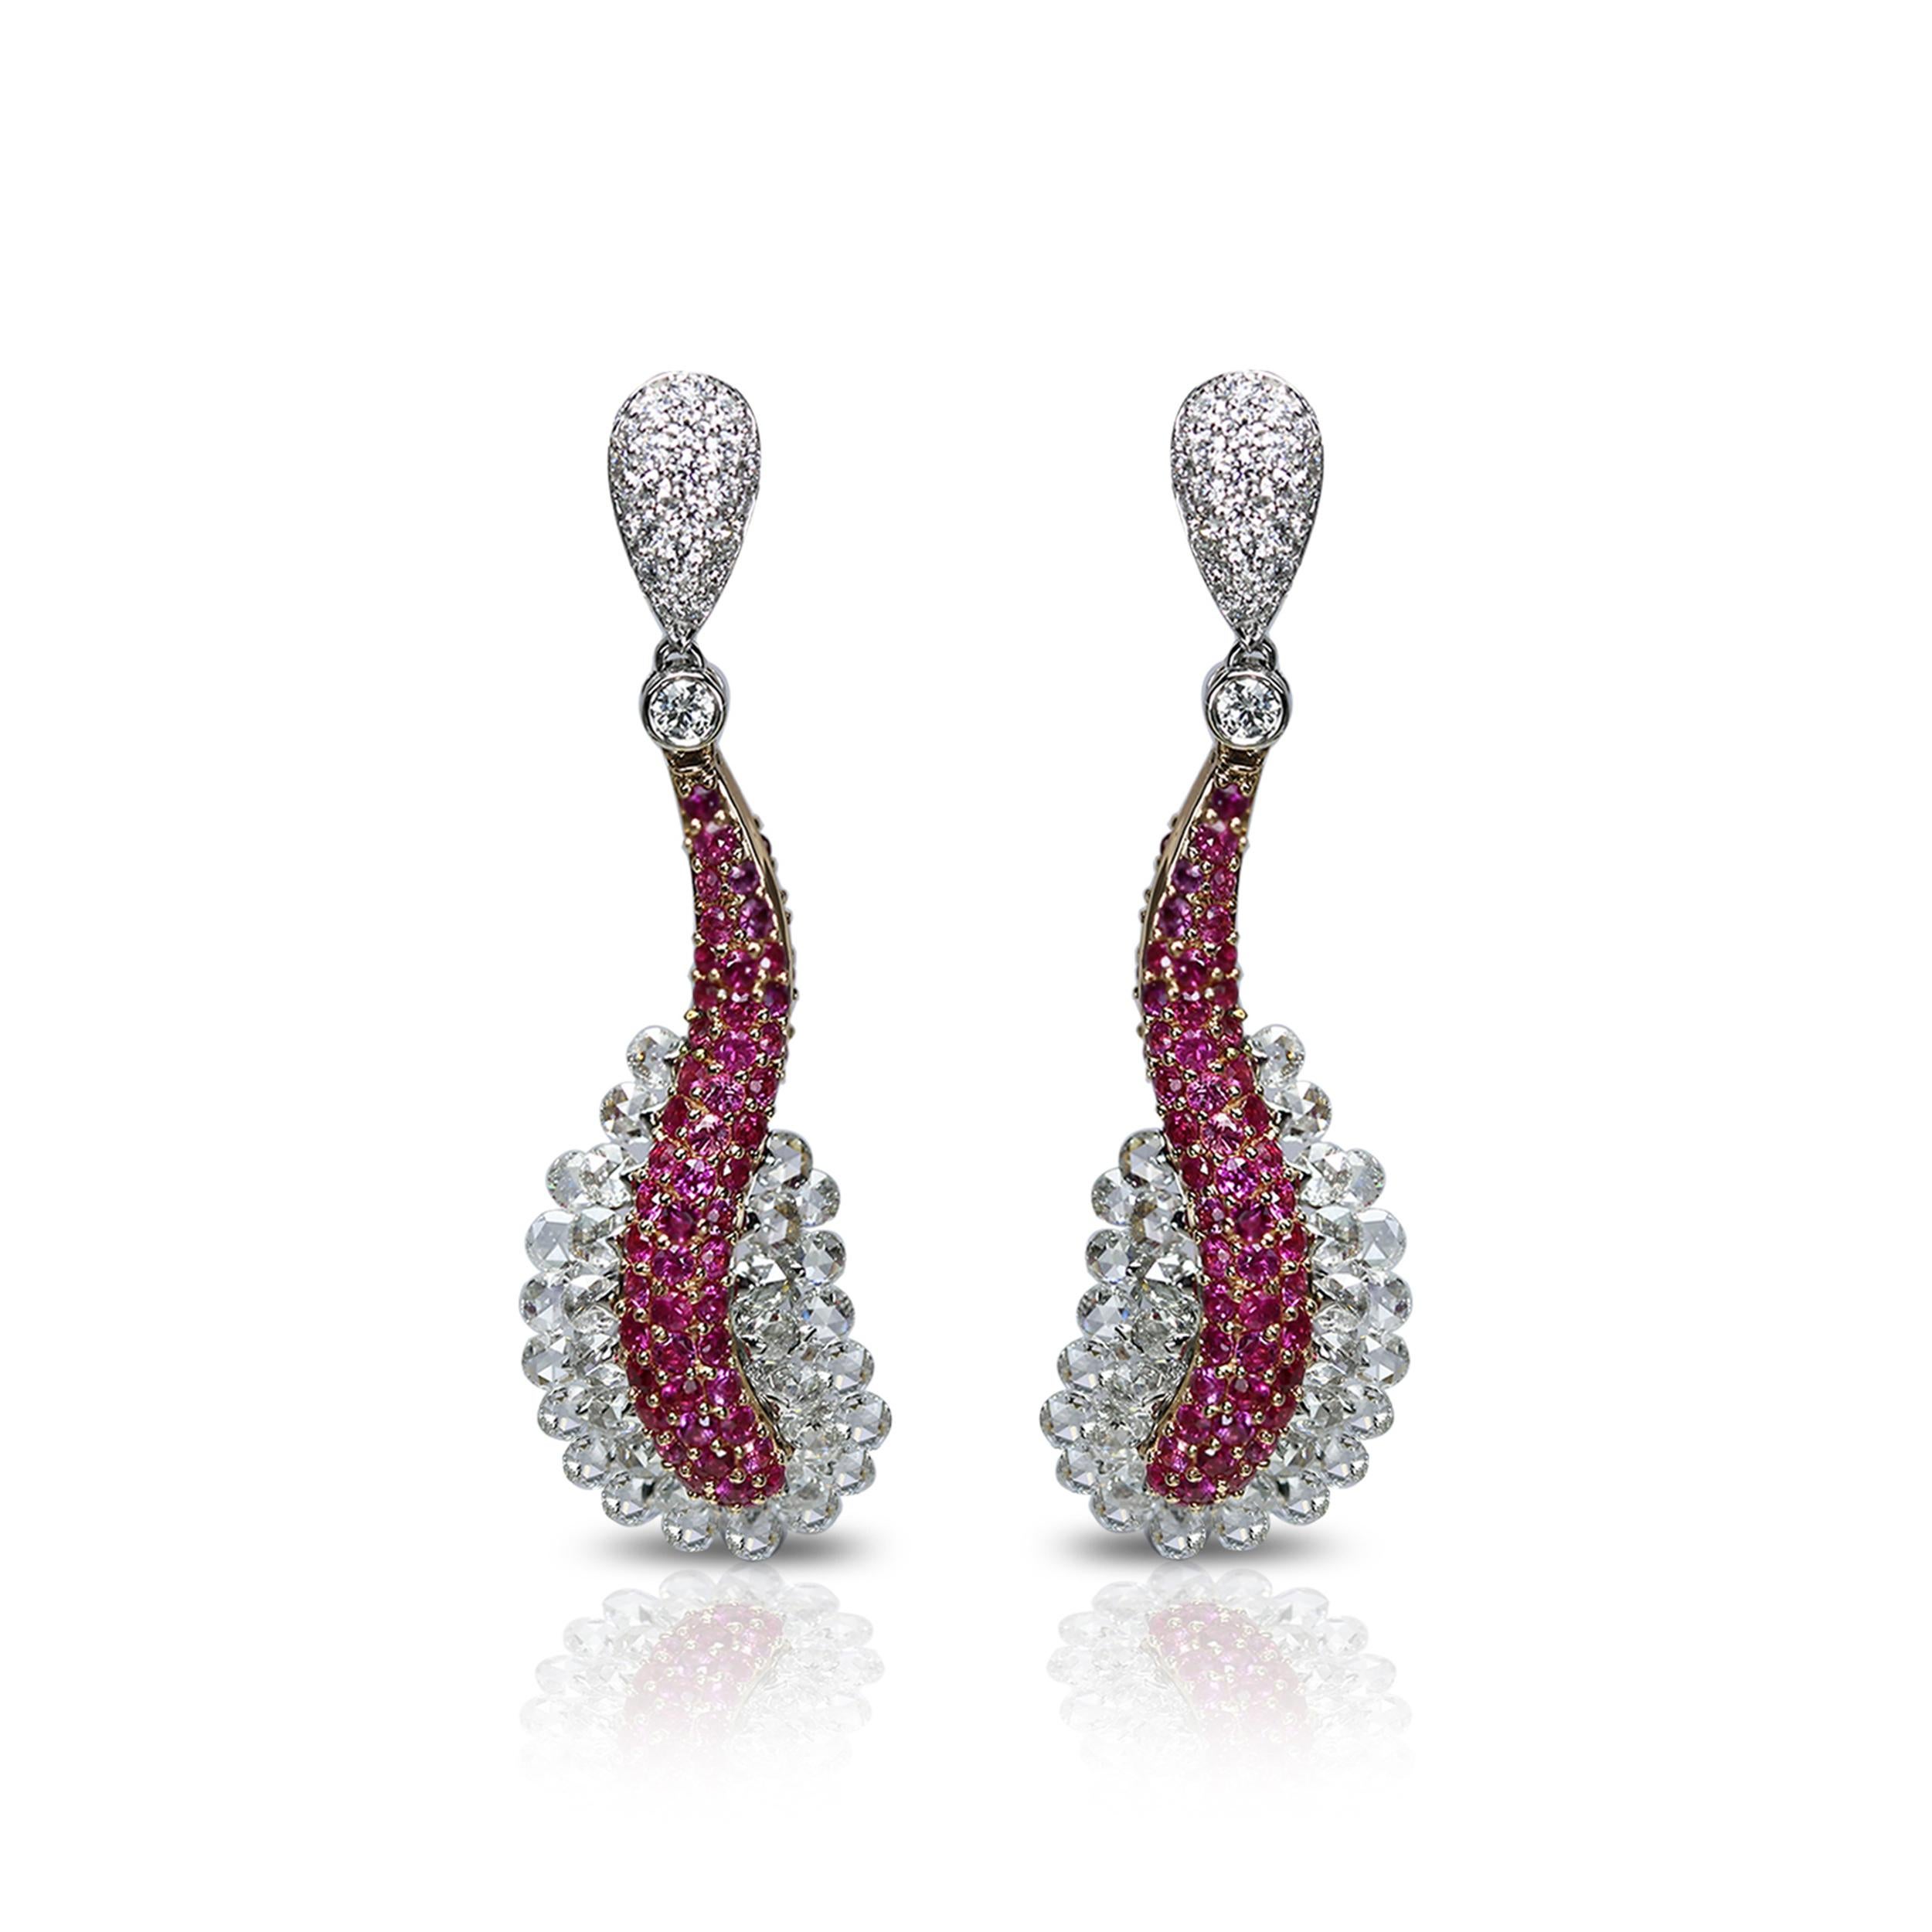 Pink sapphire and diamond earrings

These 18K white and rose gold earrings adorned with round rosecut and round brilliant cut diamonds and pink sapphires make just the right kind of memorable statement. Adorned with 330 stones set in an exquisite